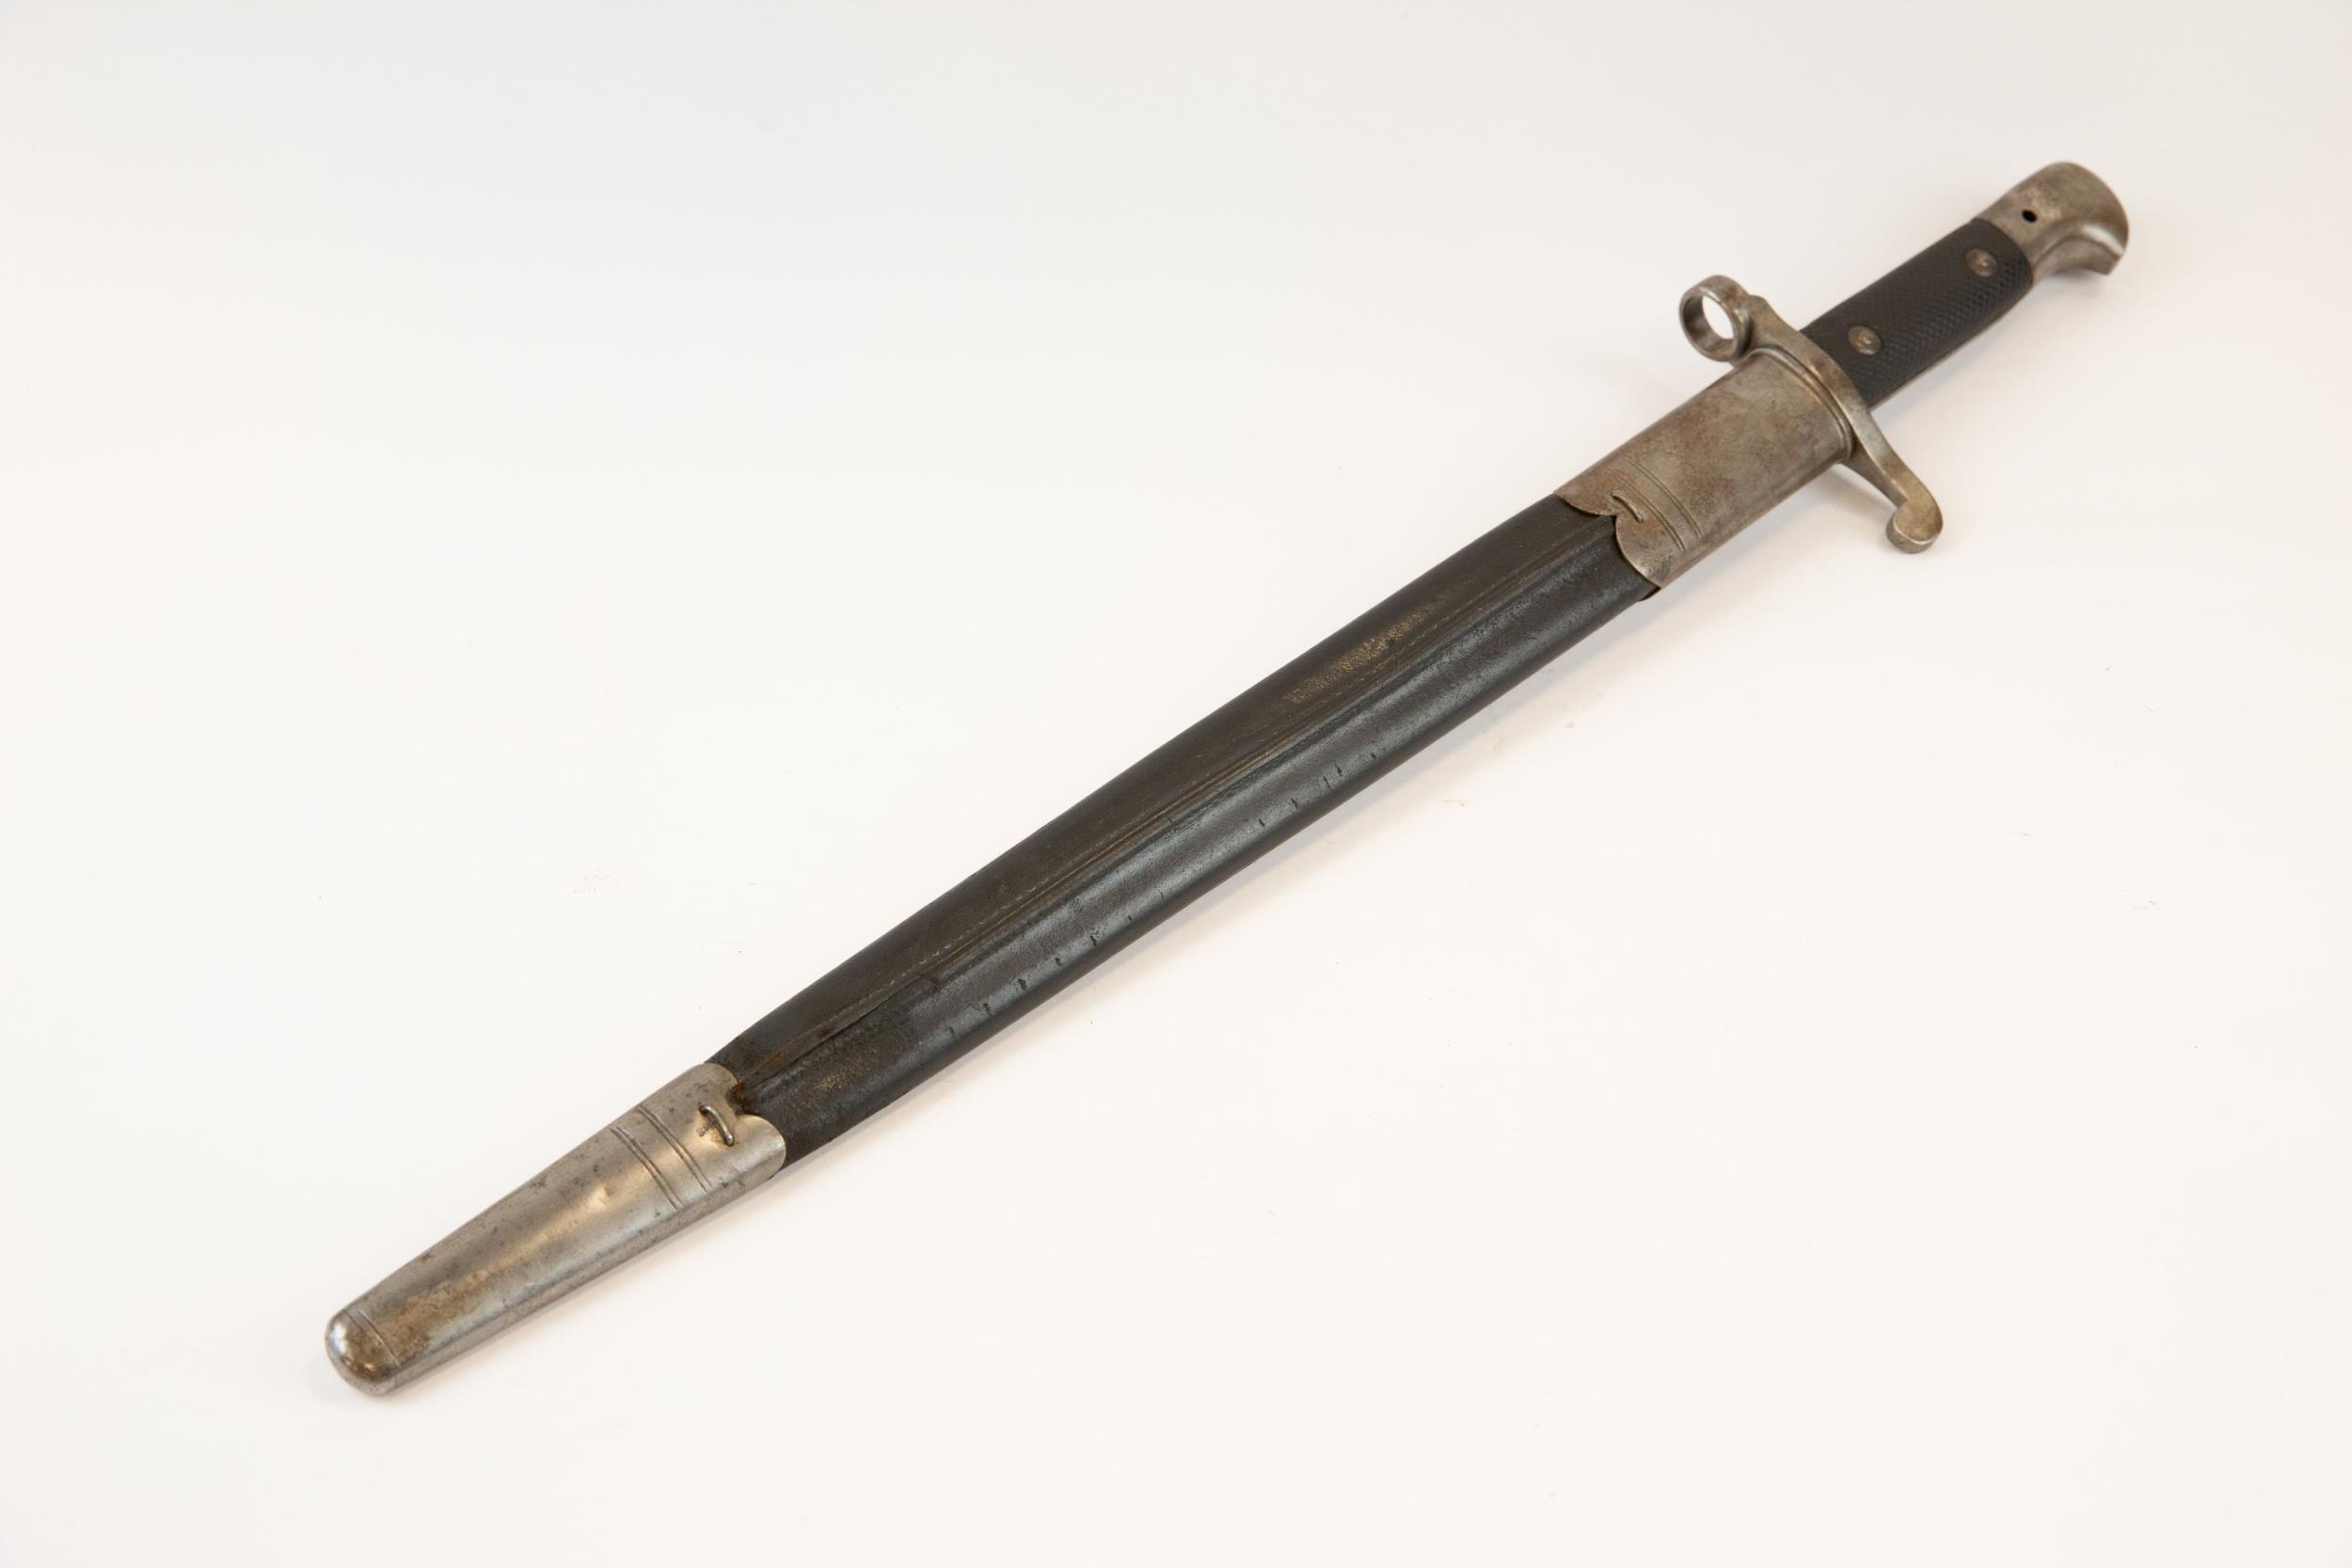 A P1887 Mark 3 sword bayonet for the Martini Henry rifle, the unfullered blade by Wilkinson Sword